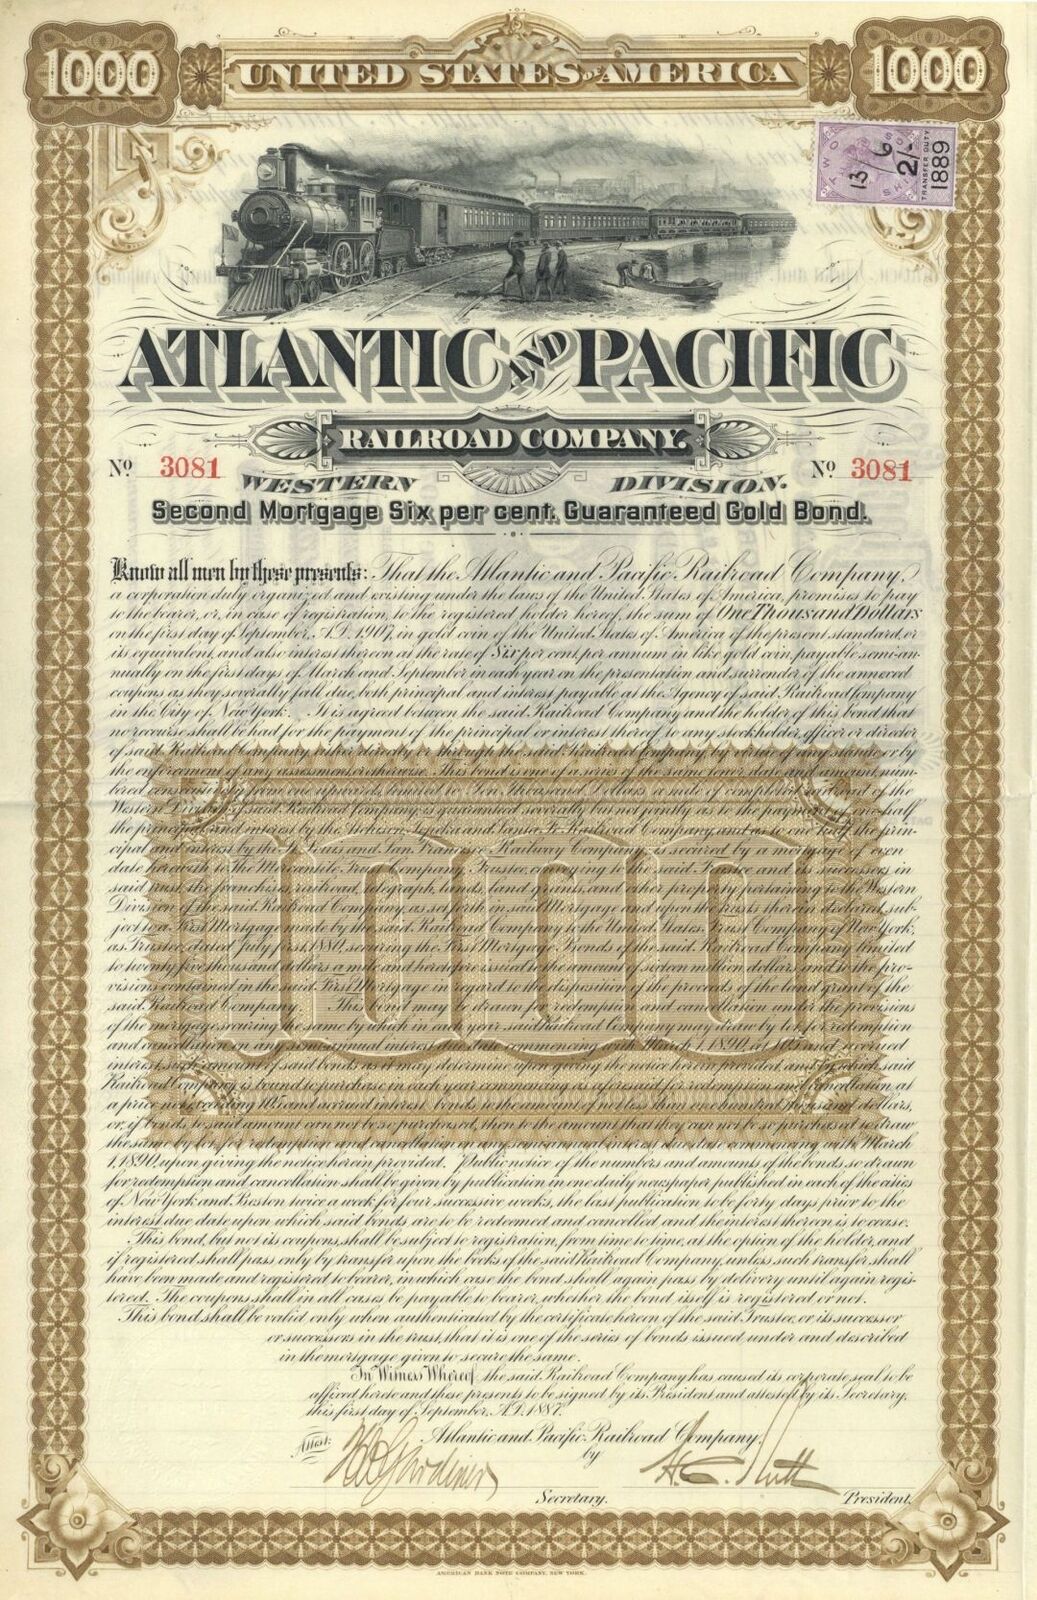 Atlantic and Pacific Railroad - 1887 dated $1,000 Railway Vertical Bond (Uncance